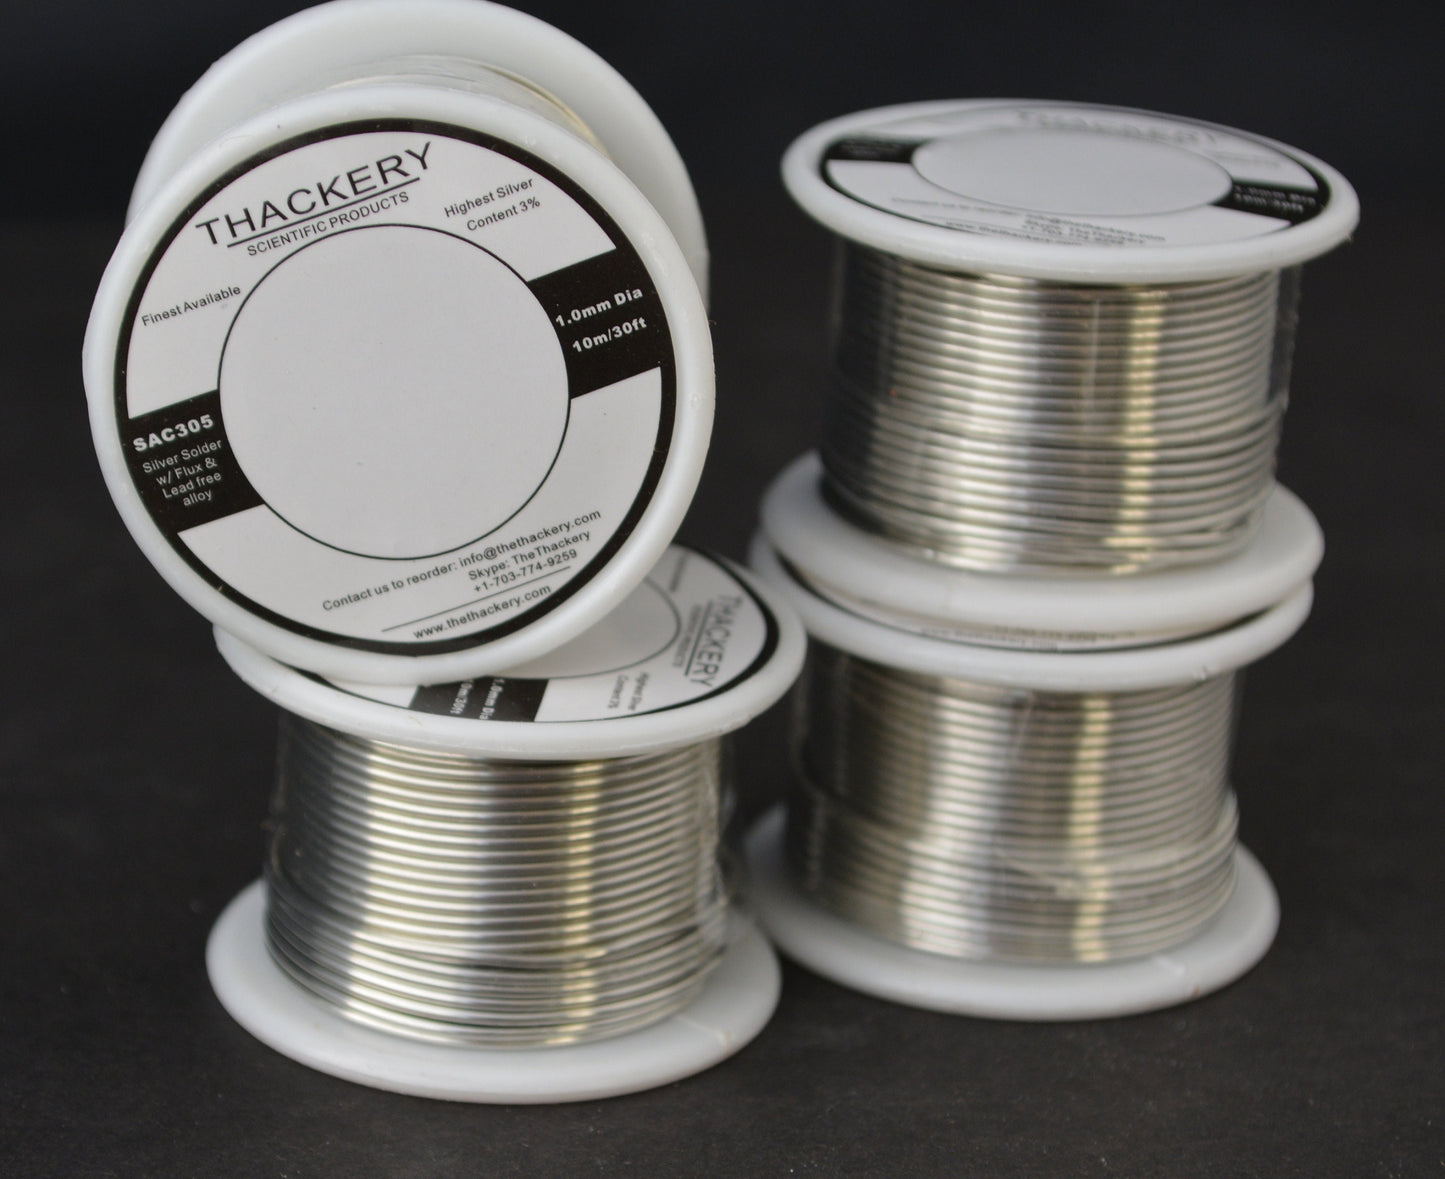 Thackery Silver Flux Core Solder Wire - SAC305 - available in .5mm .8mm and 1mm thickness - sold by the foot/meter